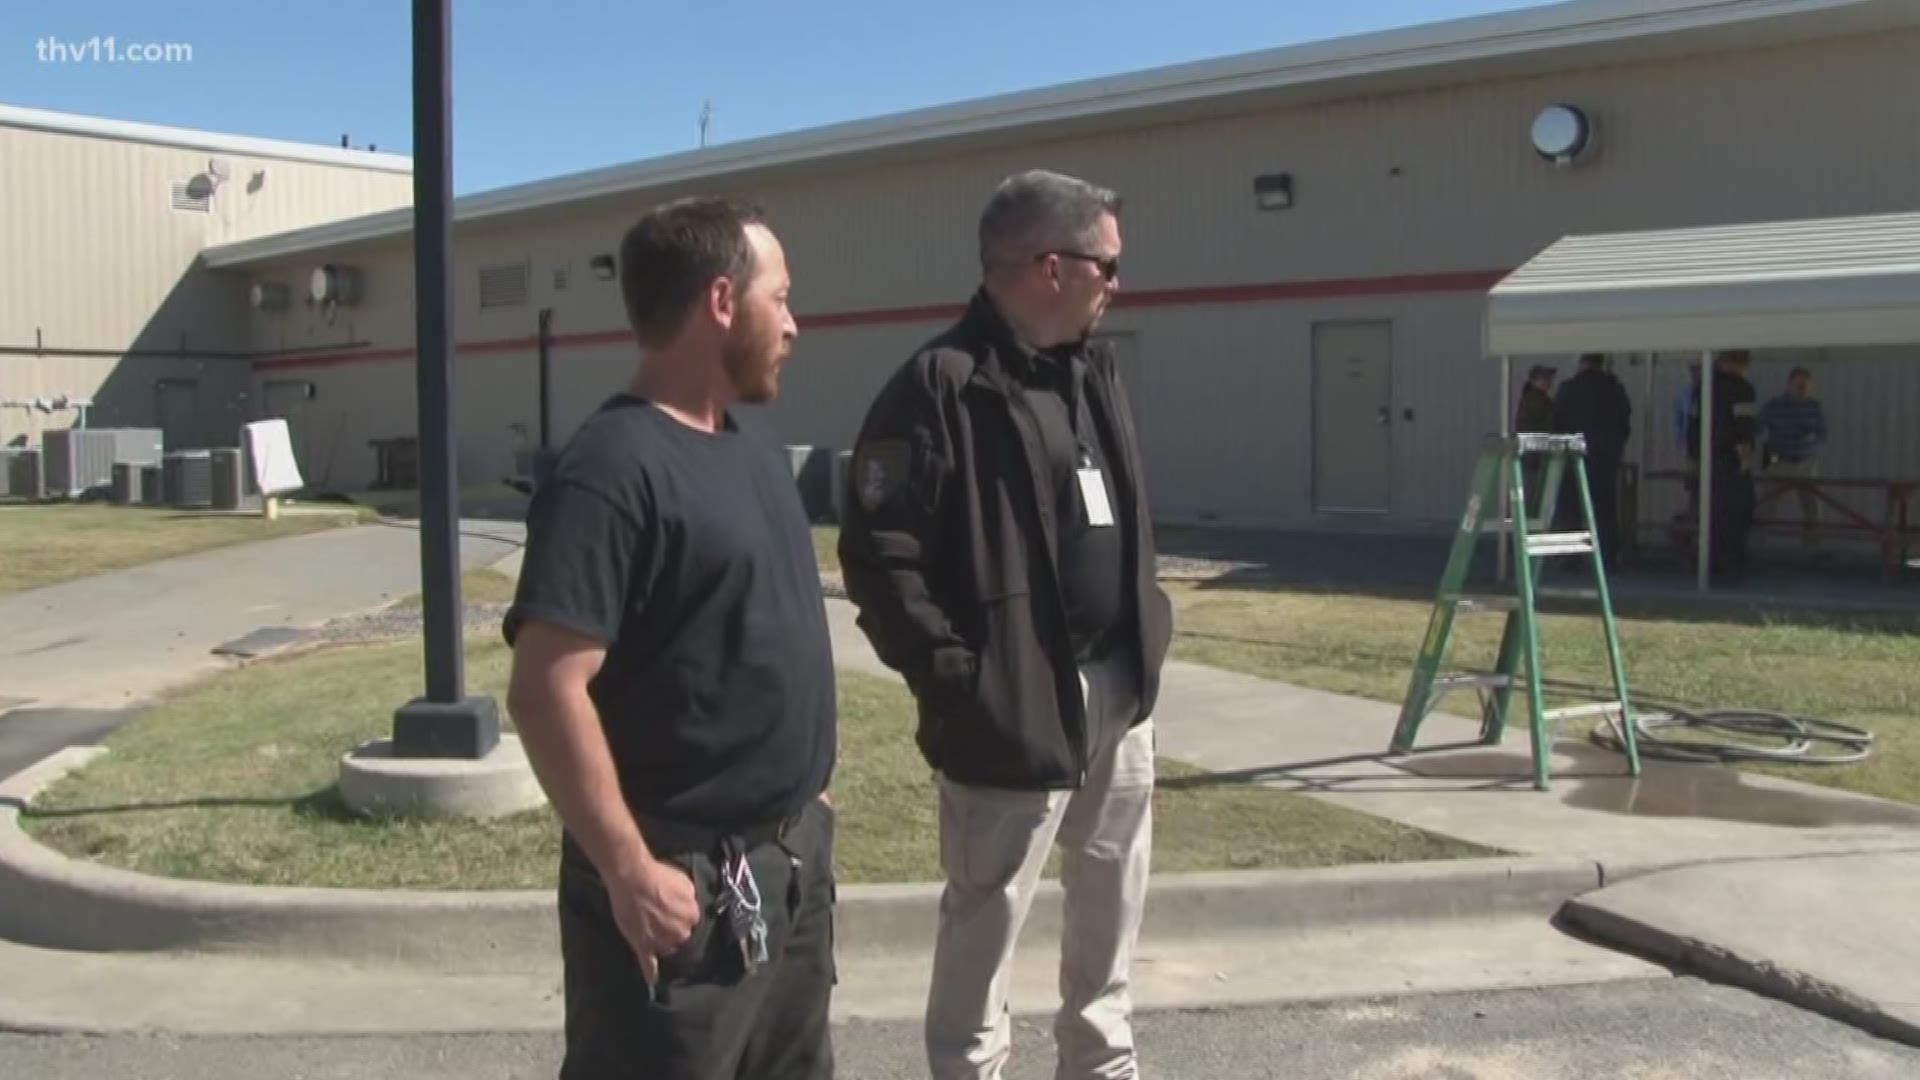 It's a success story like no other. A former Lonoke County Jail inmate is now a full-time employee there. And it's all thanks to a promise made and kept.